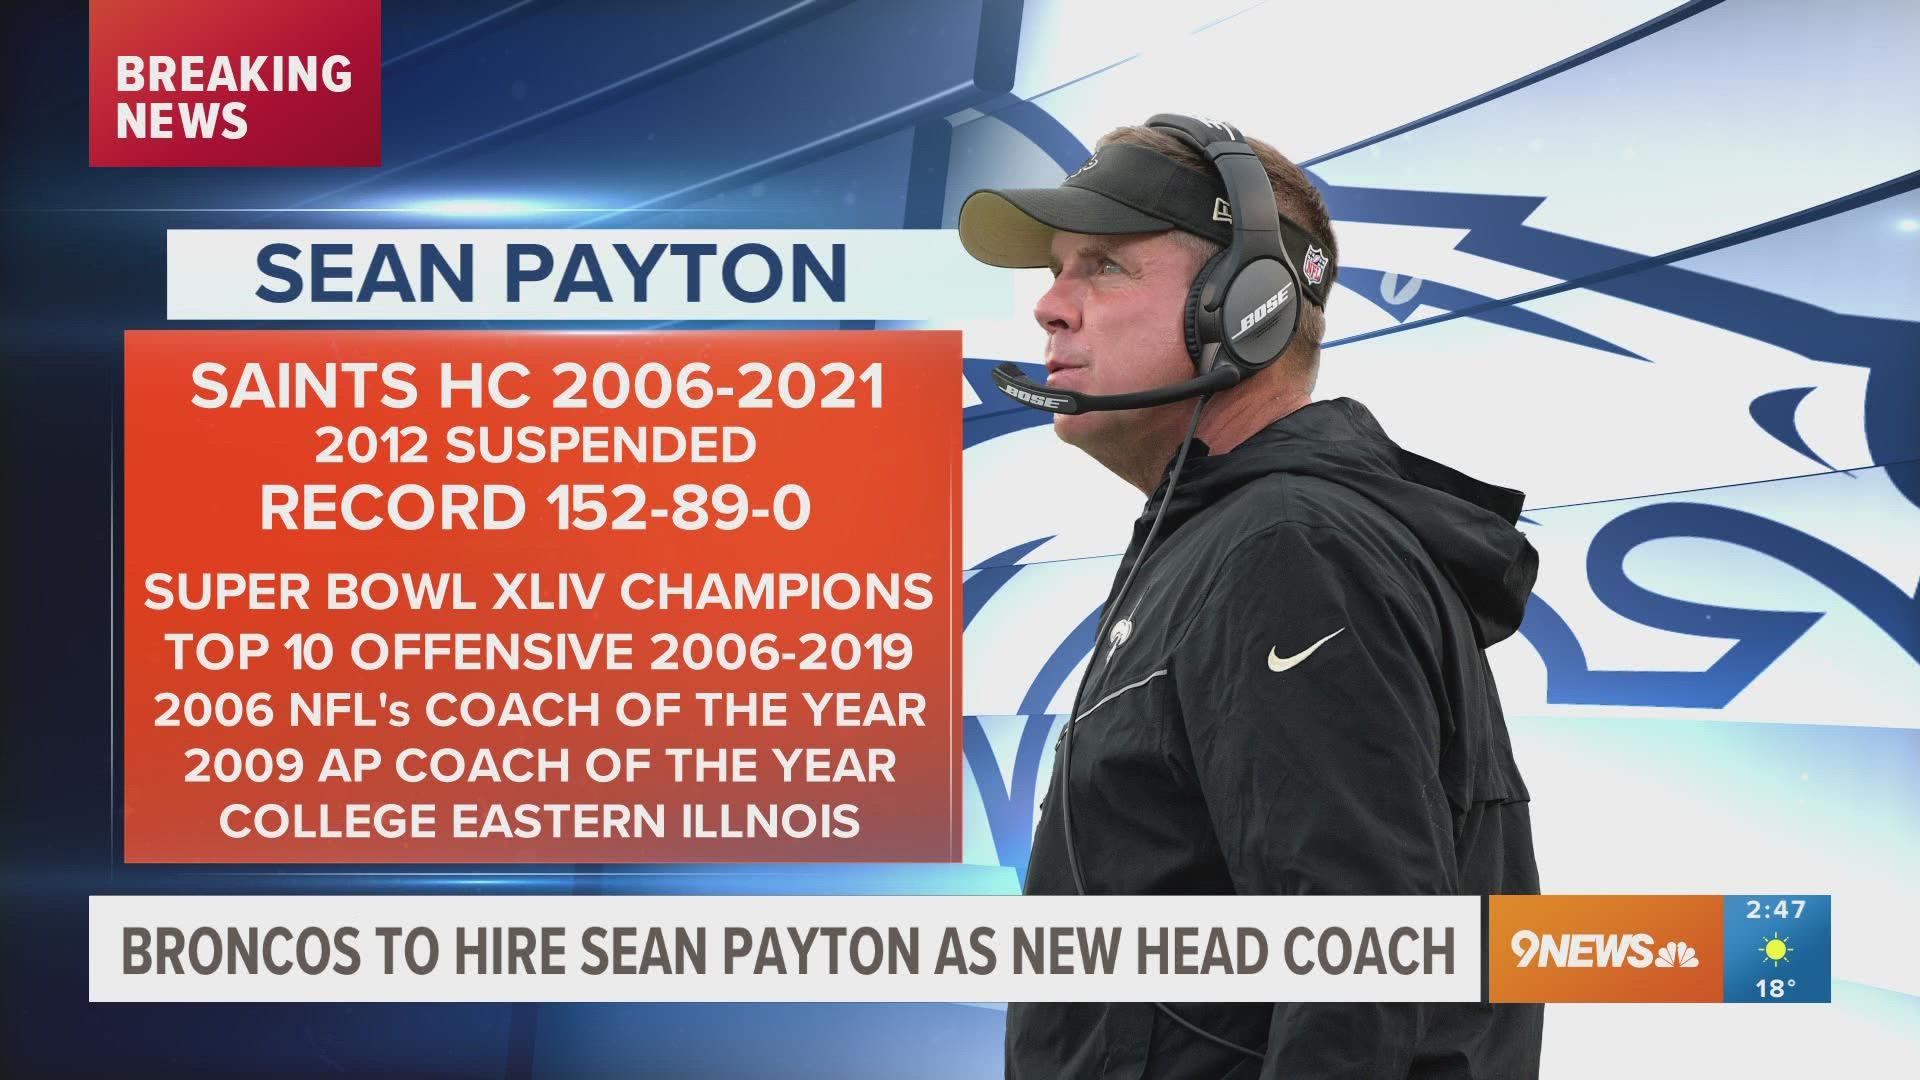 The Denver Broncos have reached agreement with the New Orleans Saints and Sean Payton fill their head coaching vacancy.